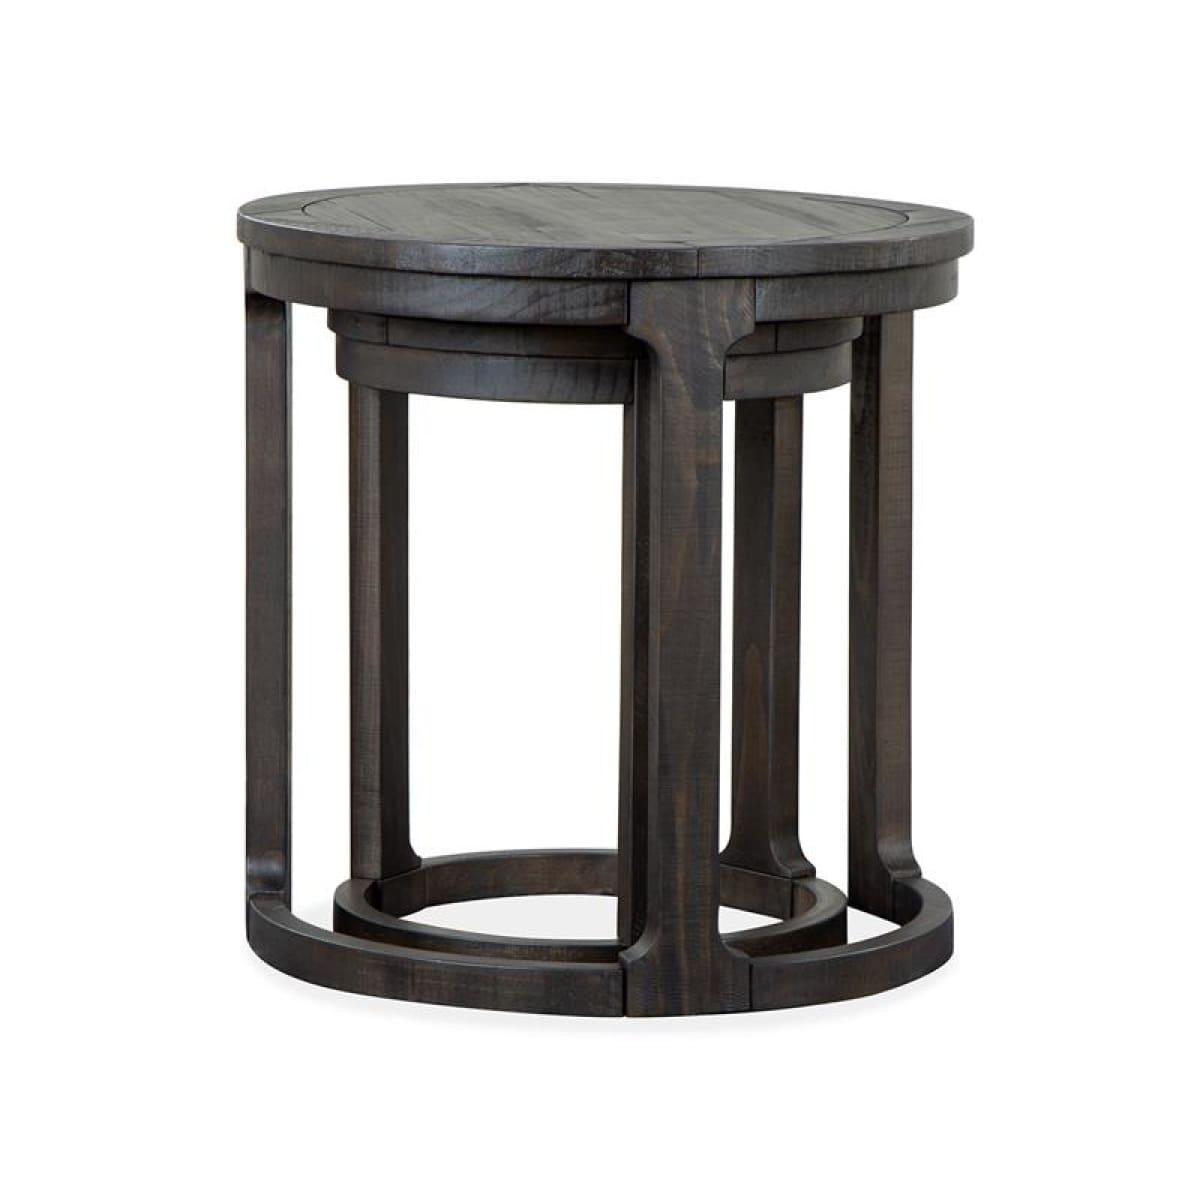 Boswell Round Cocktail Table - COFFEE TABLE